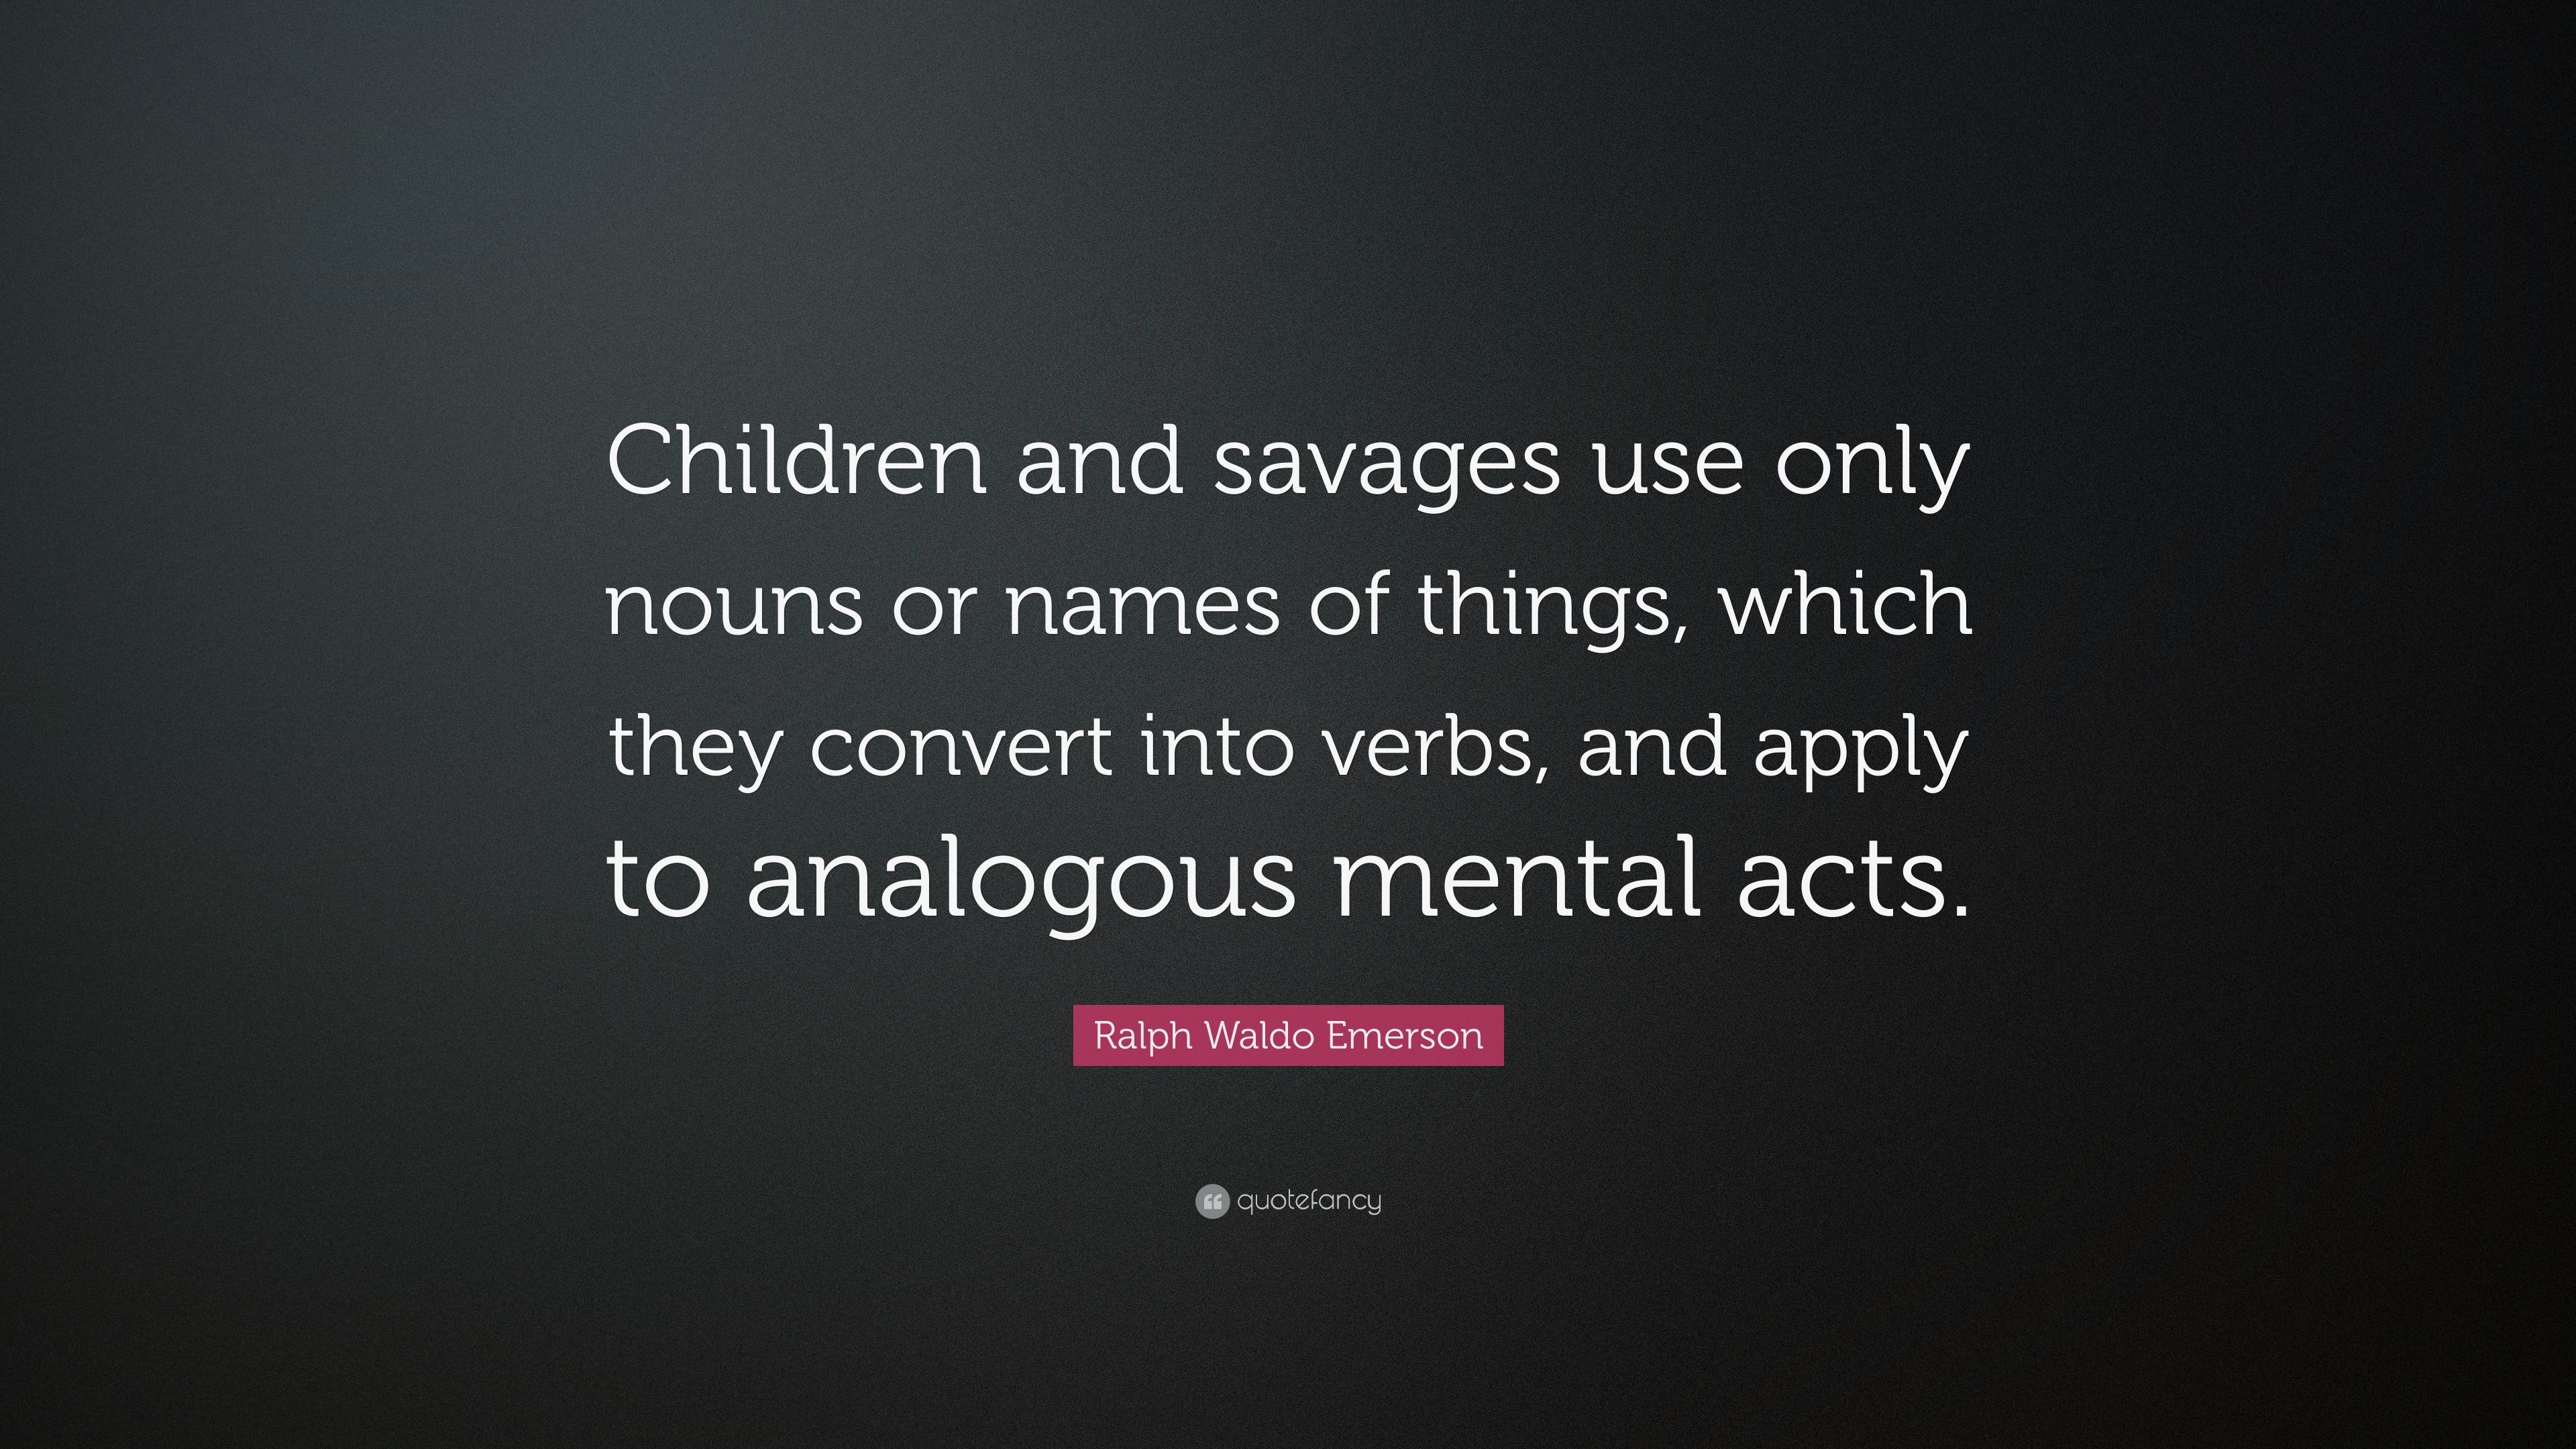 Ralph Waldo Emerson Quote: “Children and savages use only nouns or